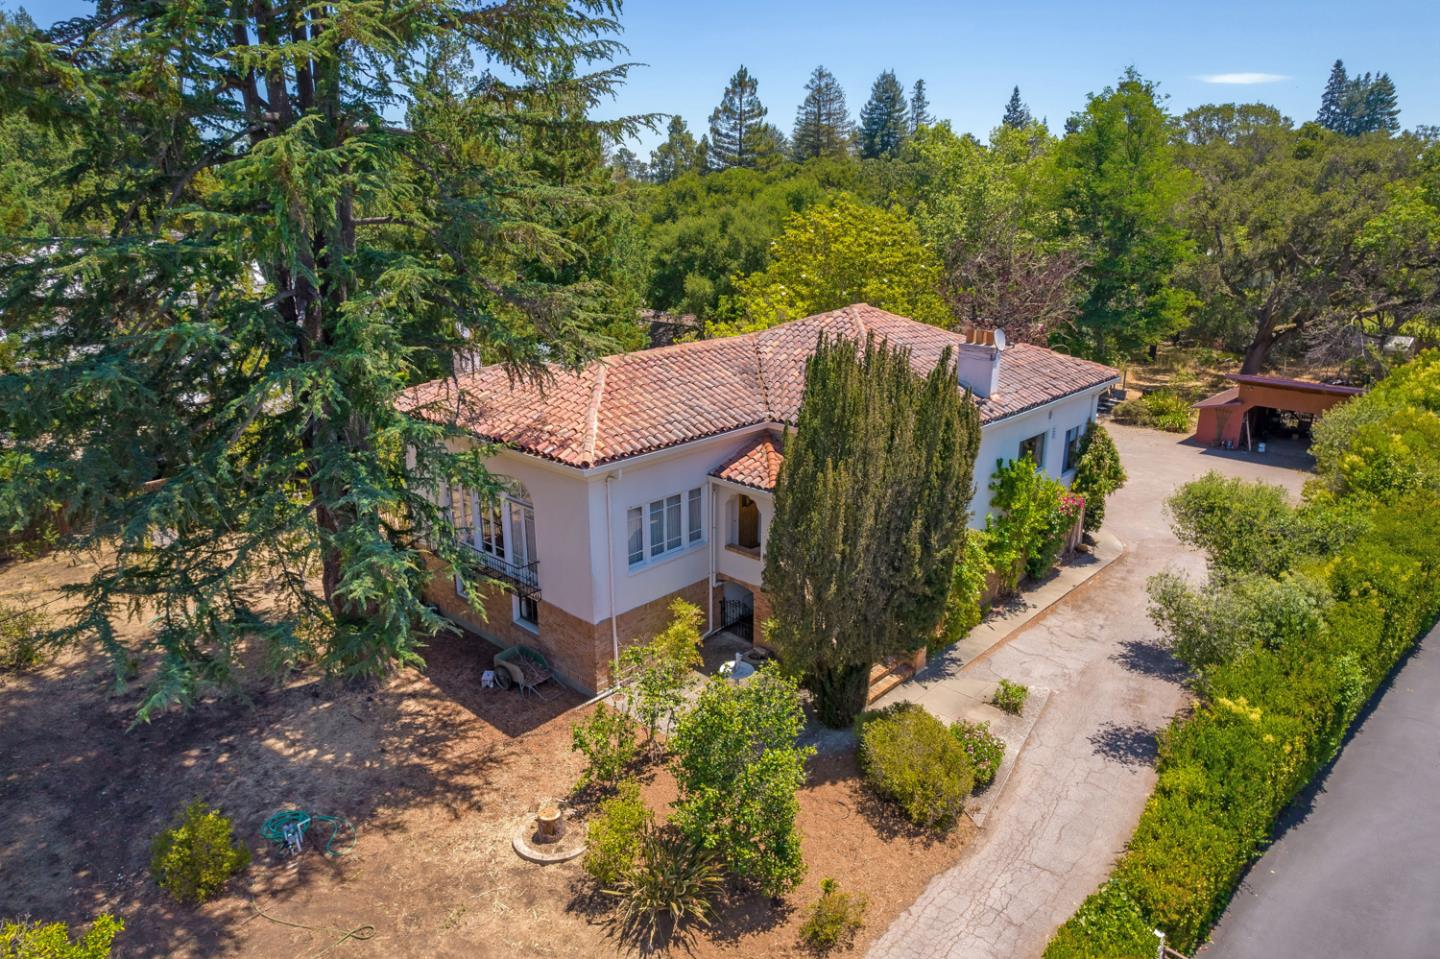 Located on one of West Atherton's most quiet and prestigious streets, this one-of-a-kind fine two-story Spanish inspired estate is situated on a large level lot with an established fruit orchard.    The main residence features 5 spacious bedrooms and 2.5 bathrooms with intricate details throughout. Beyond the main home lies a separate 1 bed/1 bath cottage with a kitchen, perfect for extended family, guests or additional office space.  167 Almendral Avenue is secluded yet conveniently located just minutes away from The Circus Club, Stanford University, renowned private schools, Sand Hill Road, and some of the most successful high-tech companies (Facebook, Google, and Apple). Atherton's mid-peninsula location is also centrally located between San Francisco and San Jose International Airports.  Because of its privacy, beauty, and location, this represents a rare opportunity to own one of the finest properties in Atherton.